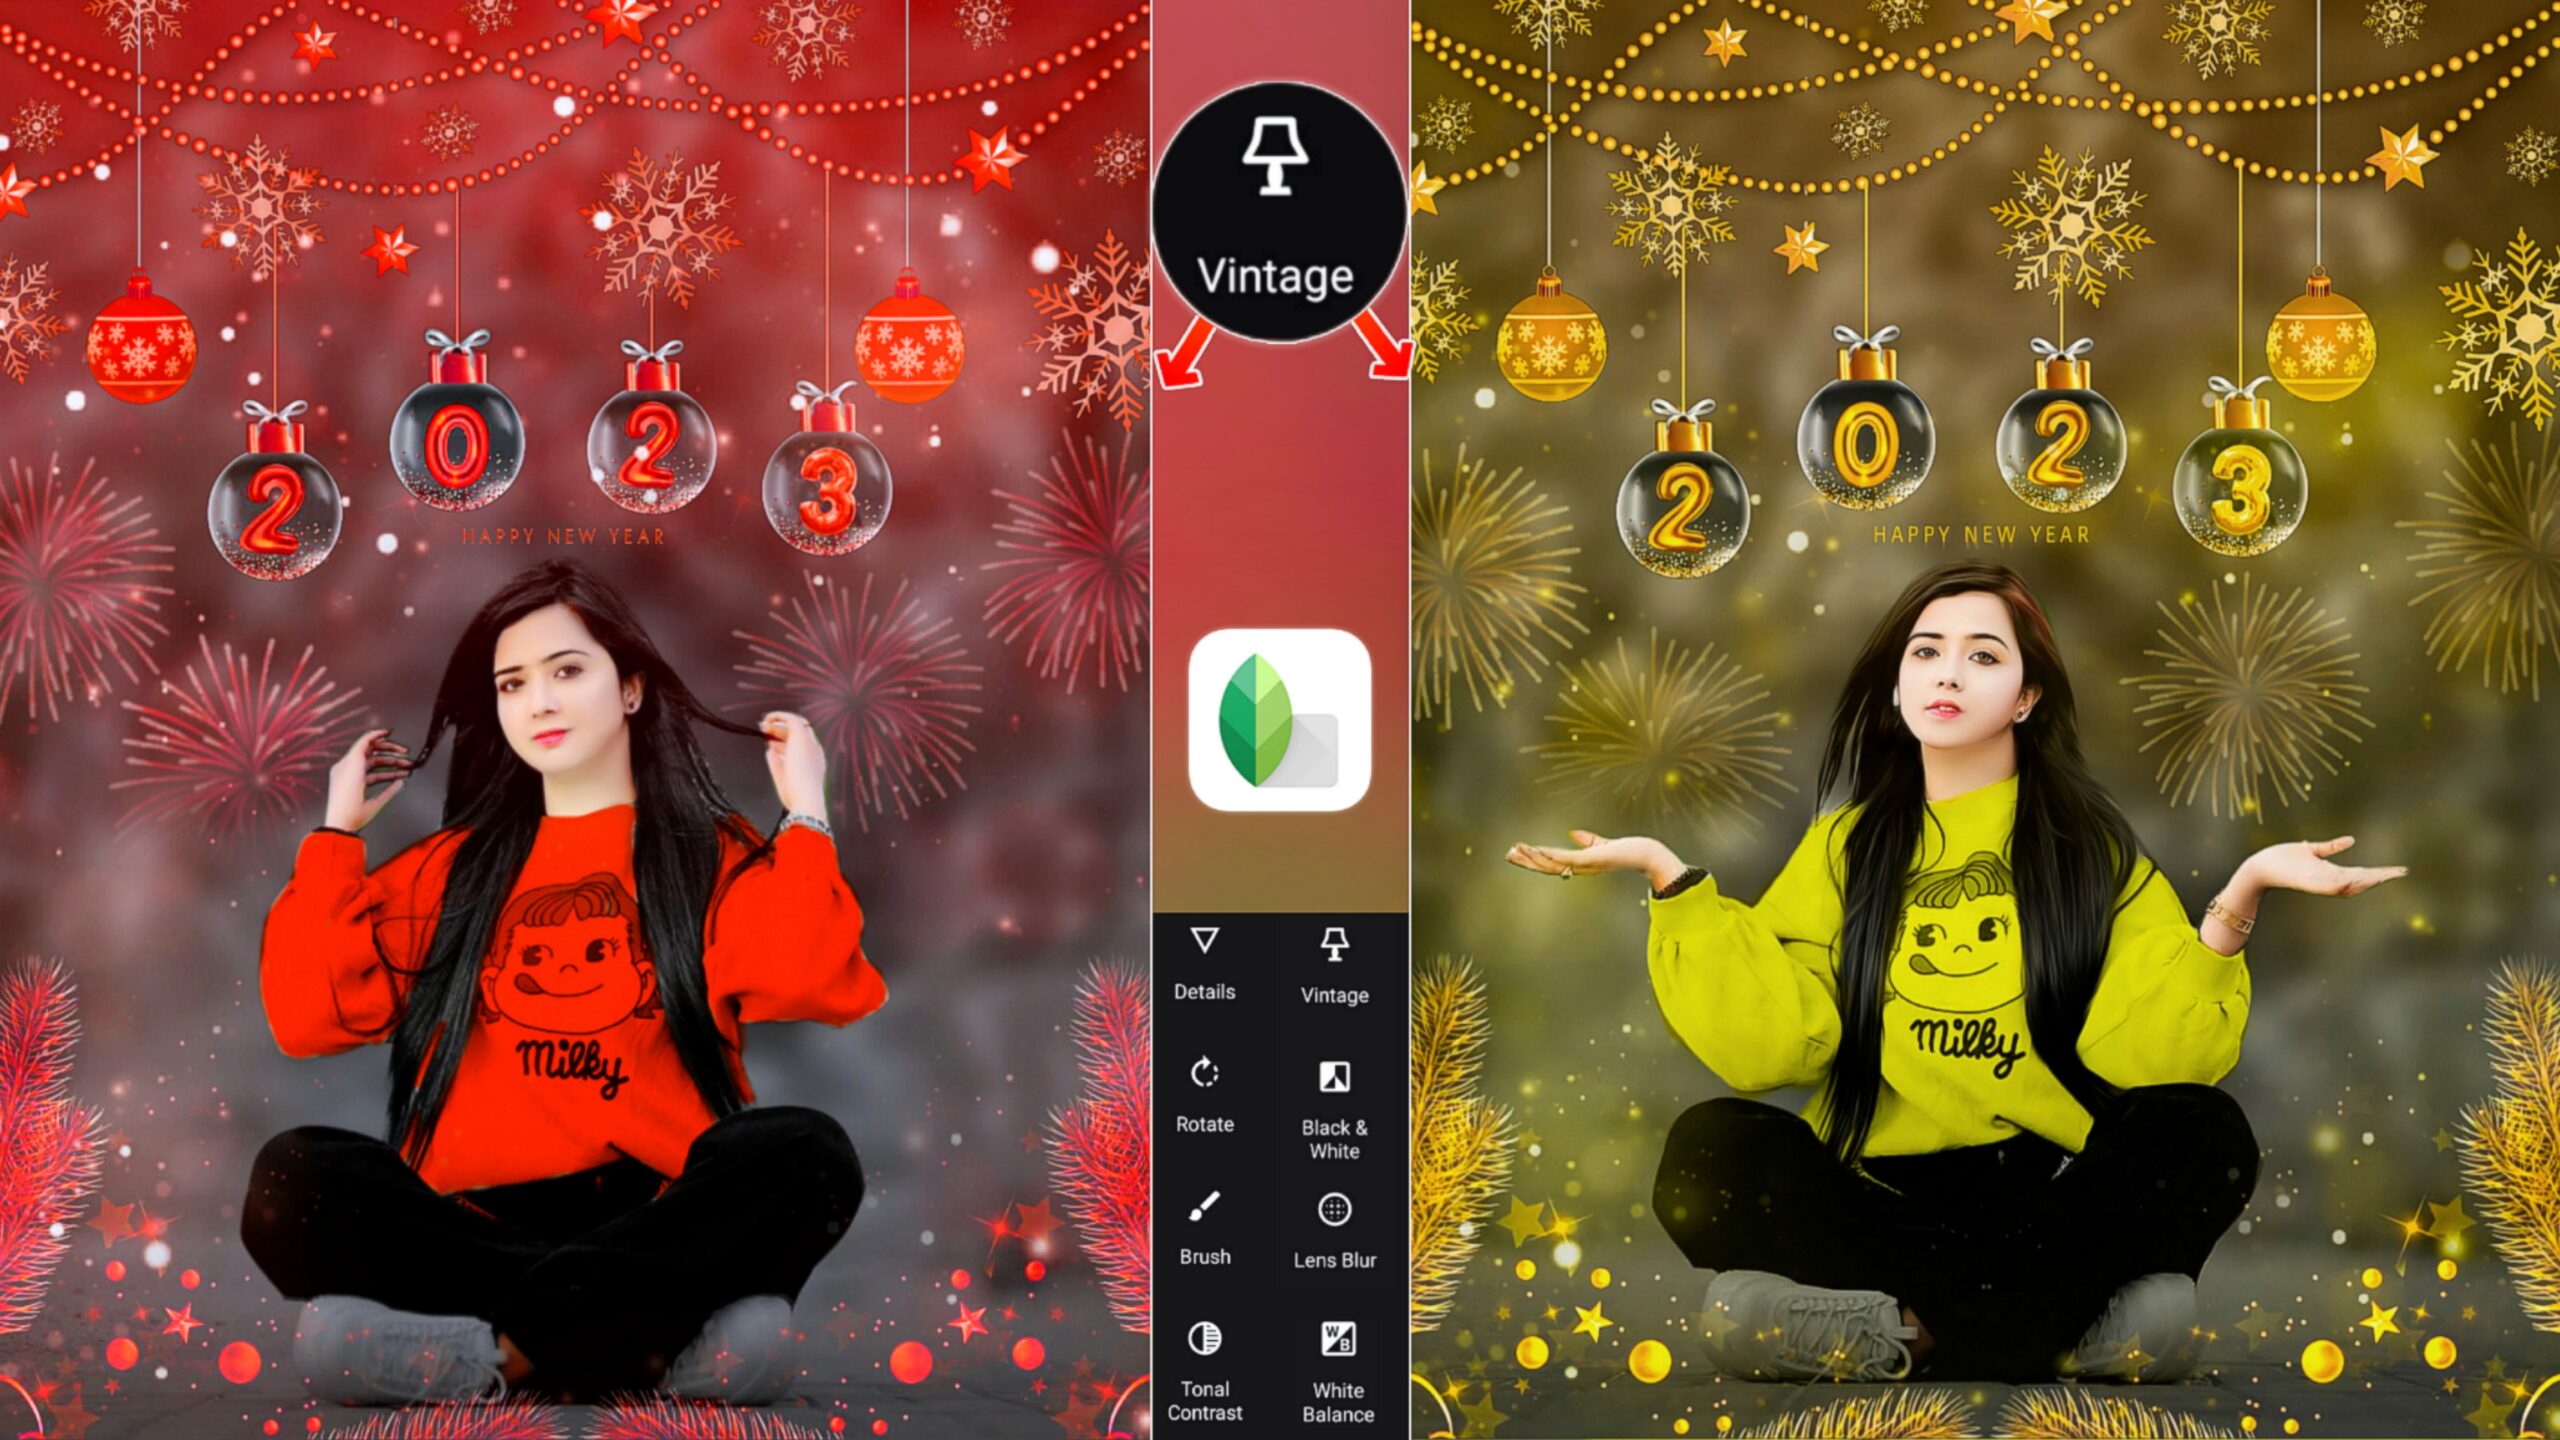 Snapseed happy new year 2023 photo editing background and png - Razz Suman  Photography